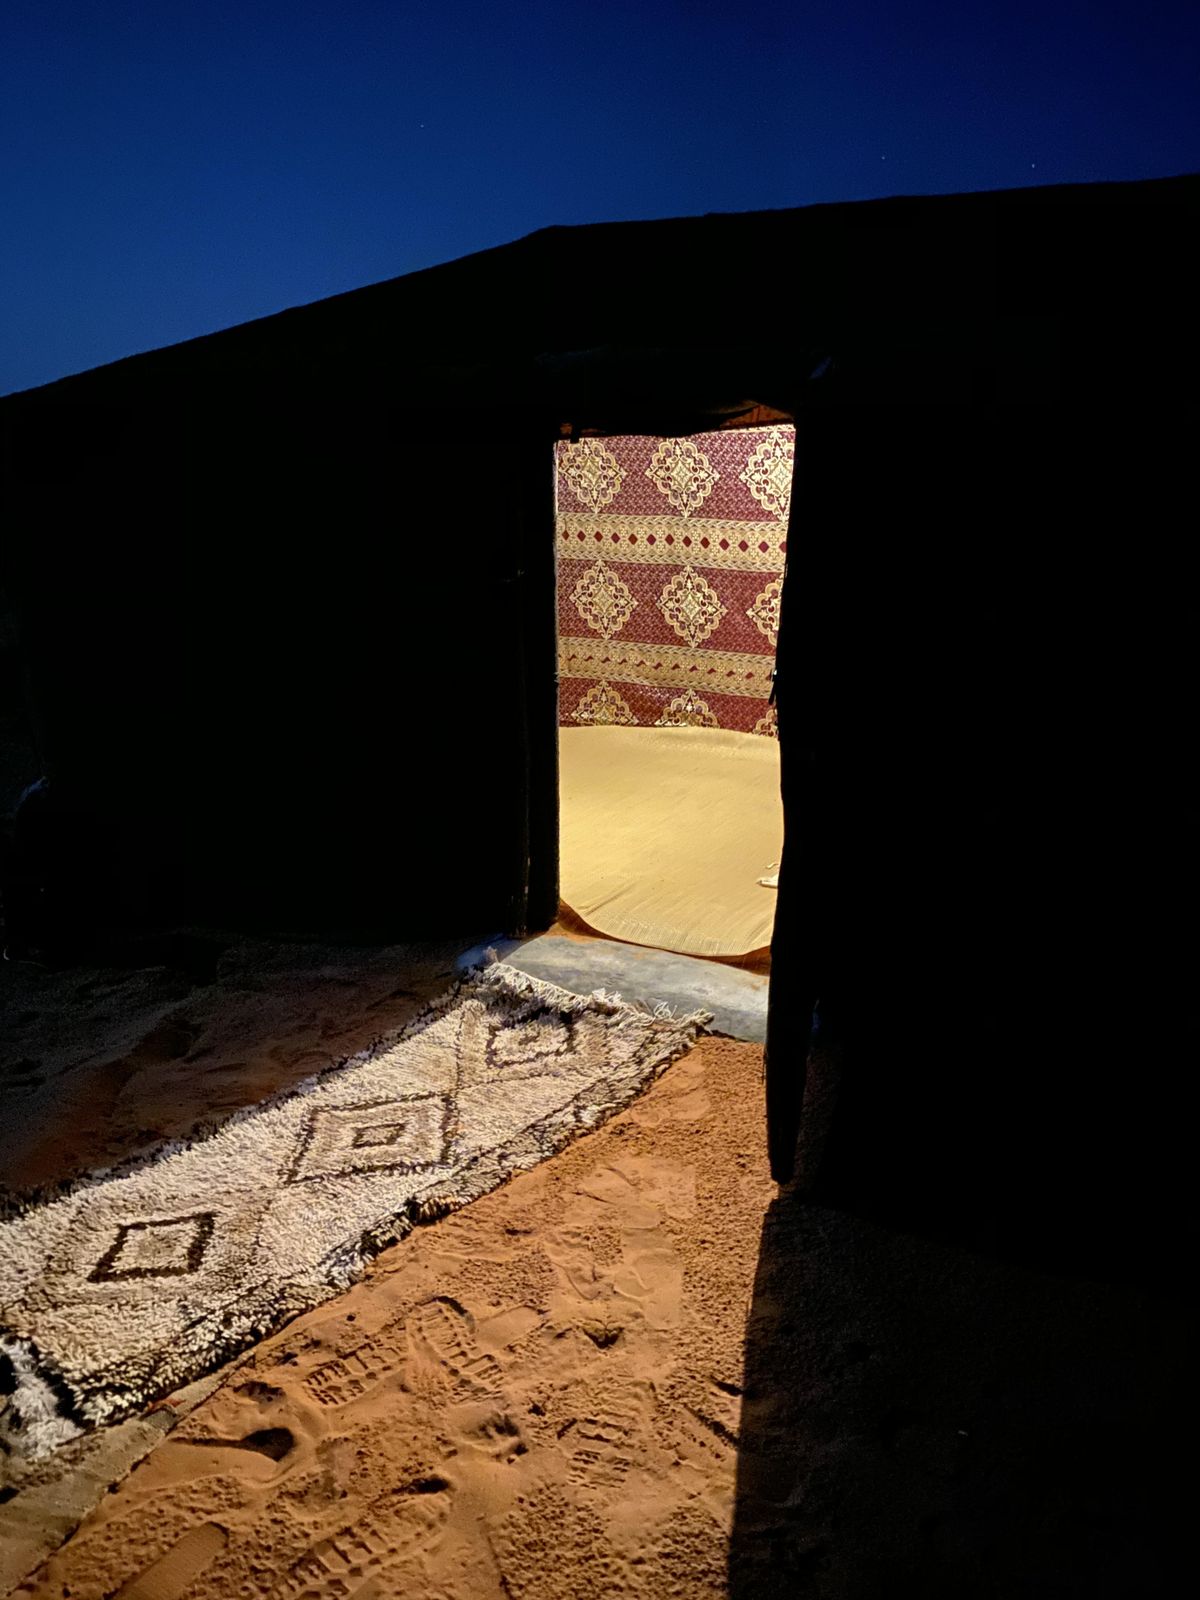 A doorway view of our Berber tent in the dunes of the Sahara Desert. (Dan Webster/For The Spokesman-Review)